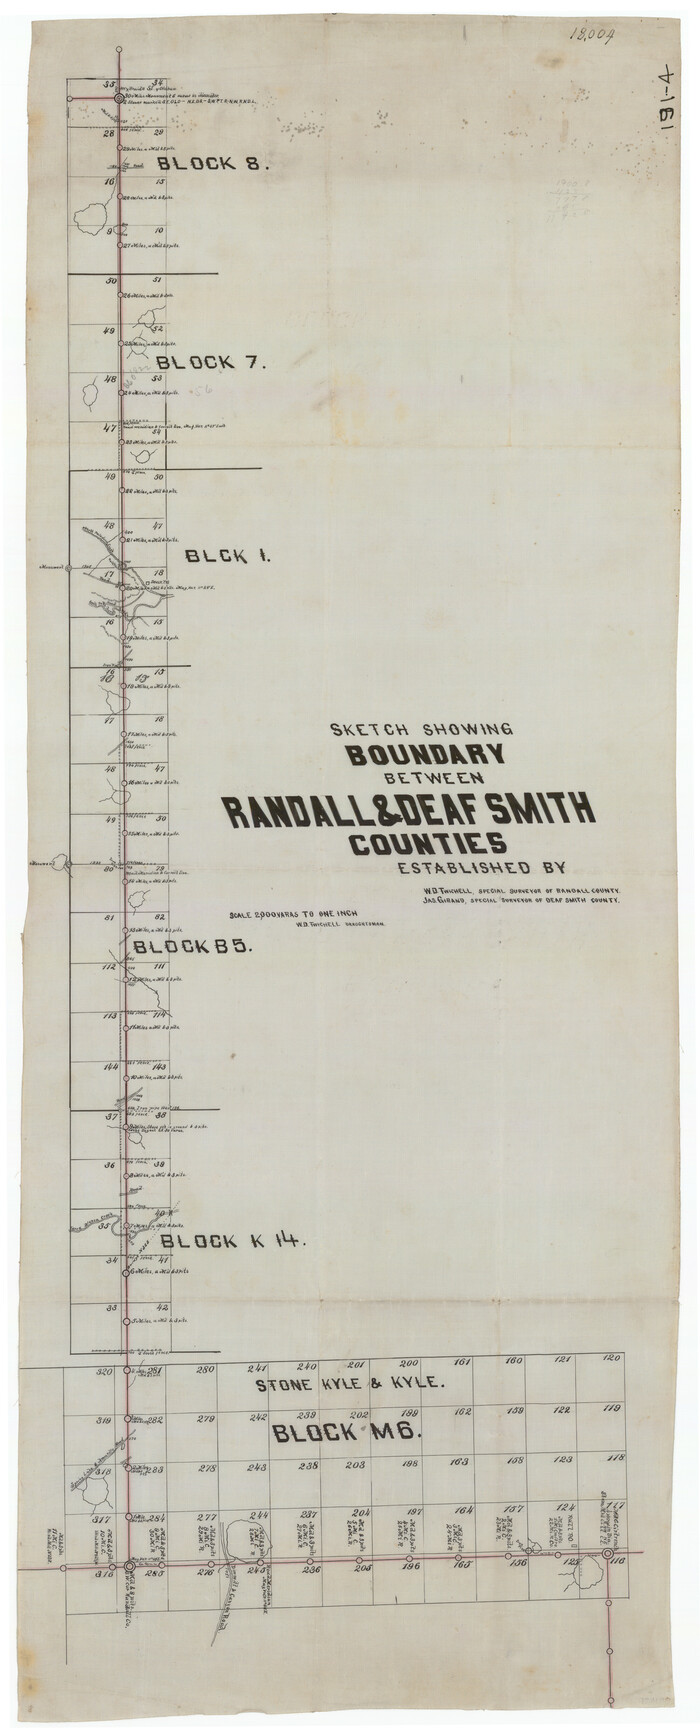 91832, Sketch Showing Boundary Between Randall and Deaf Smith Counties, Twichell Survey Records